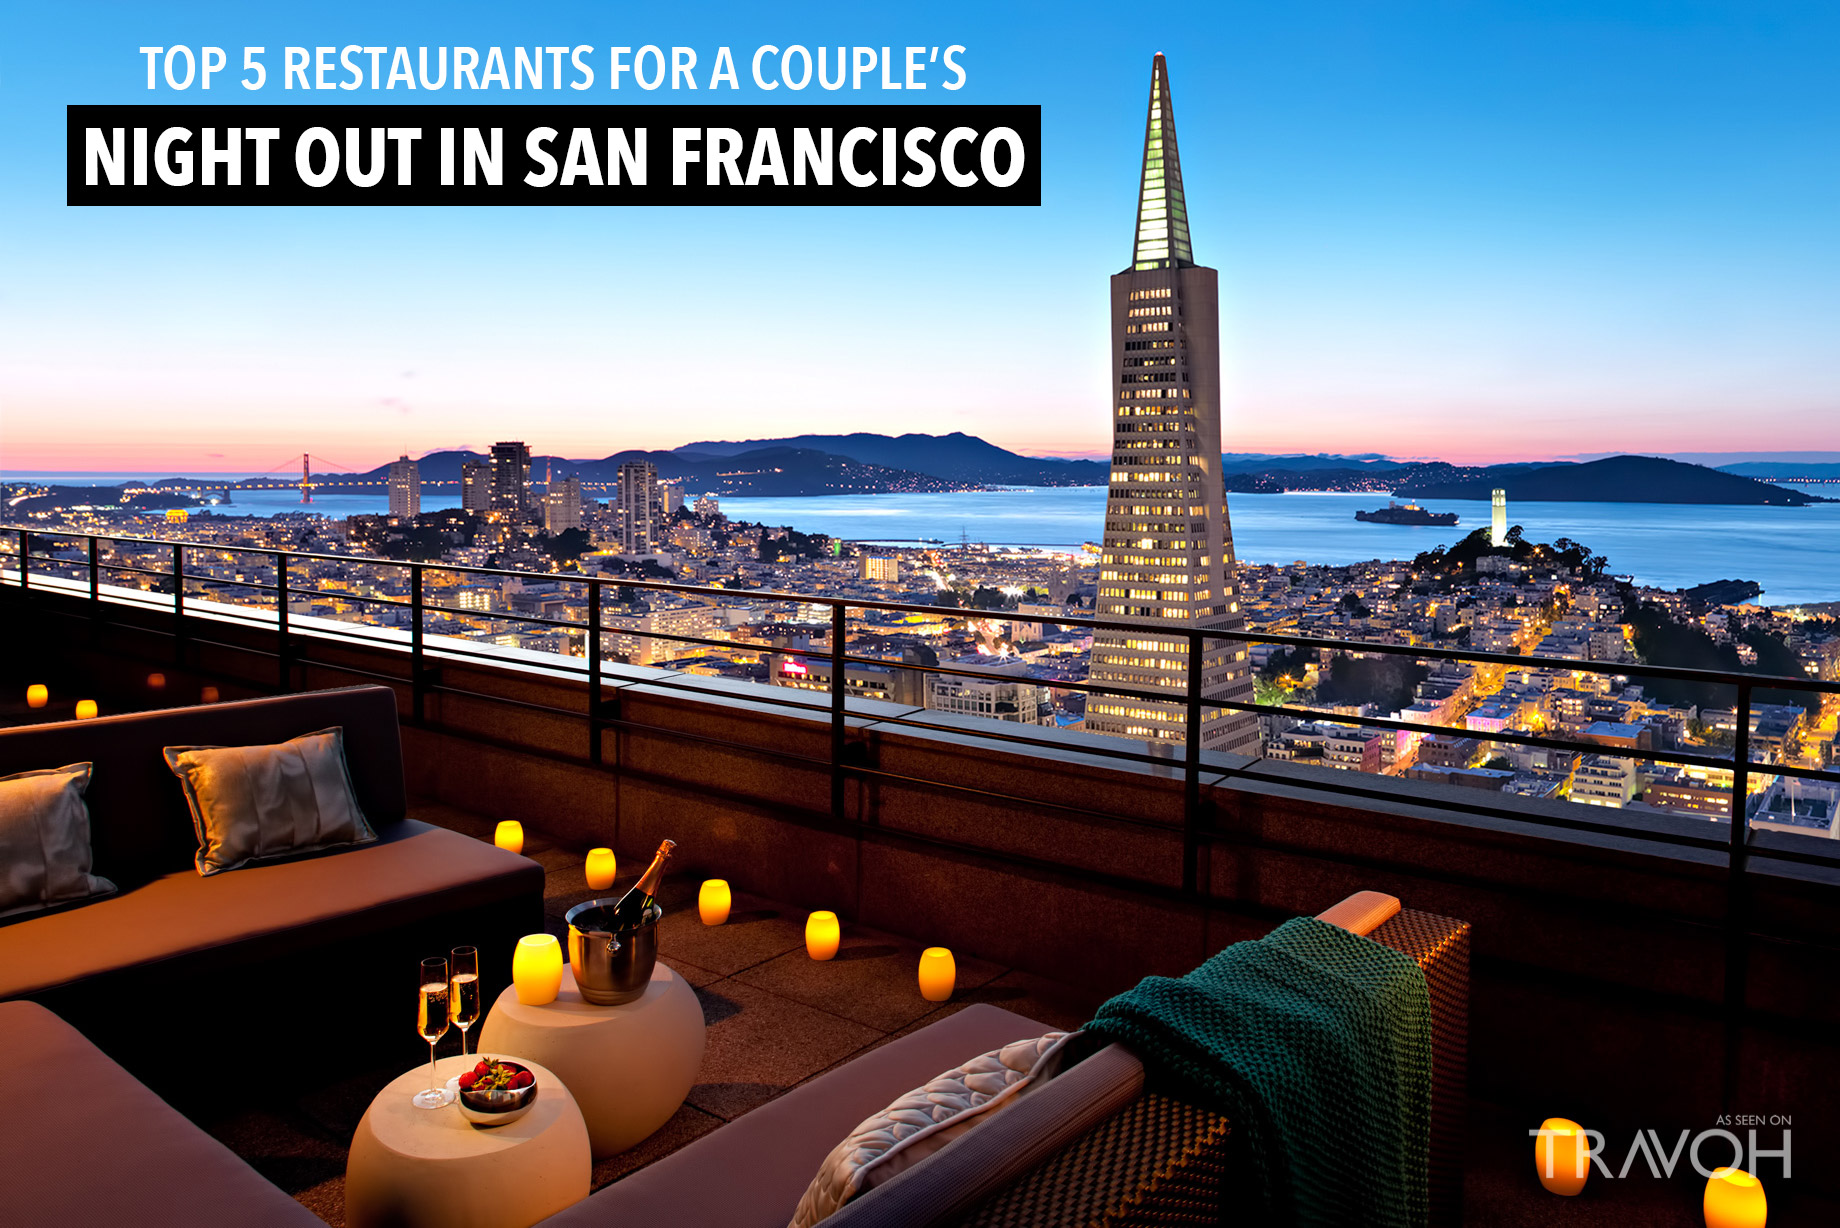 Top 5 Restaurants for a Couple’s Night Out in San Francisco